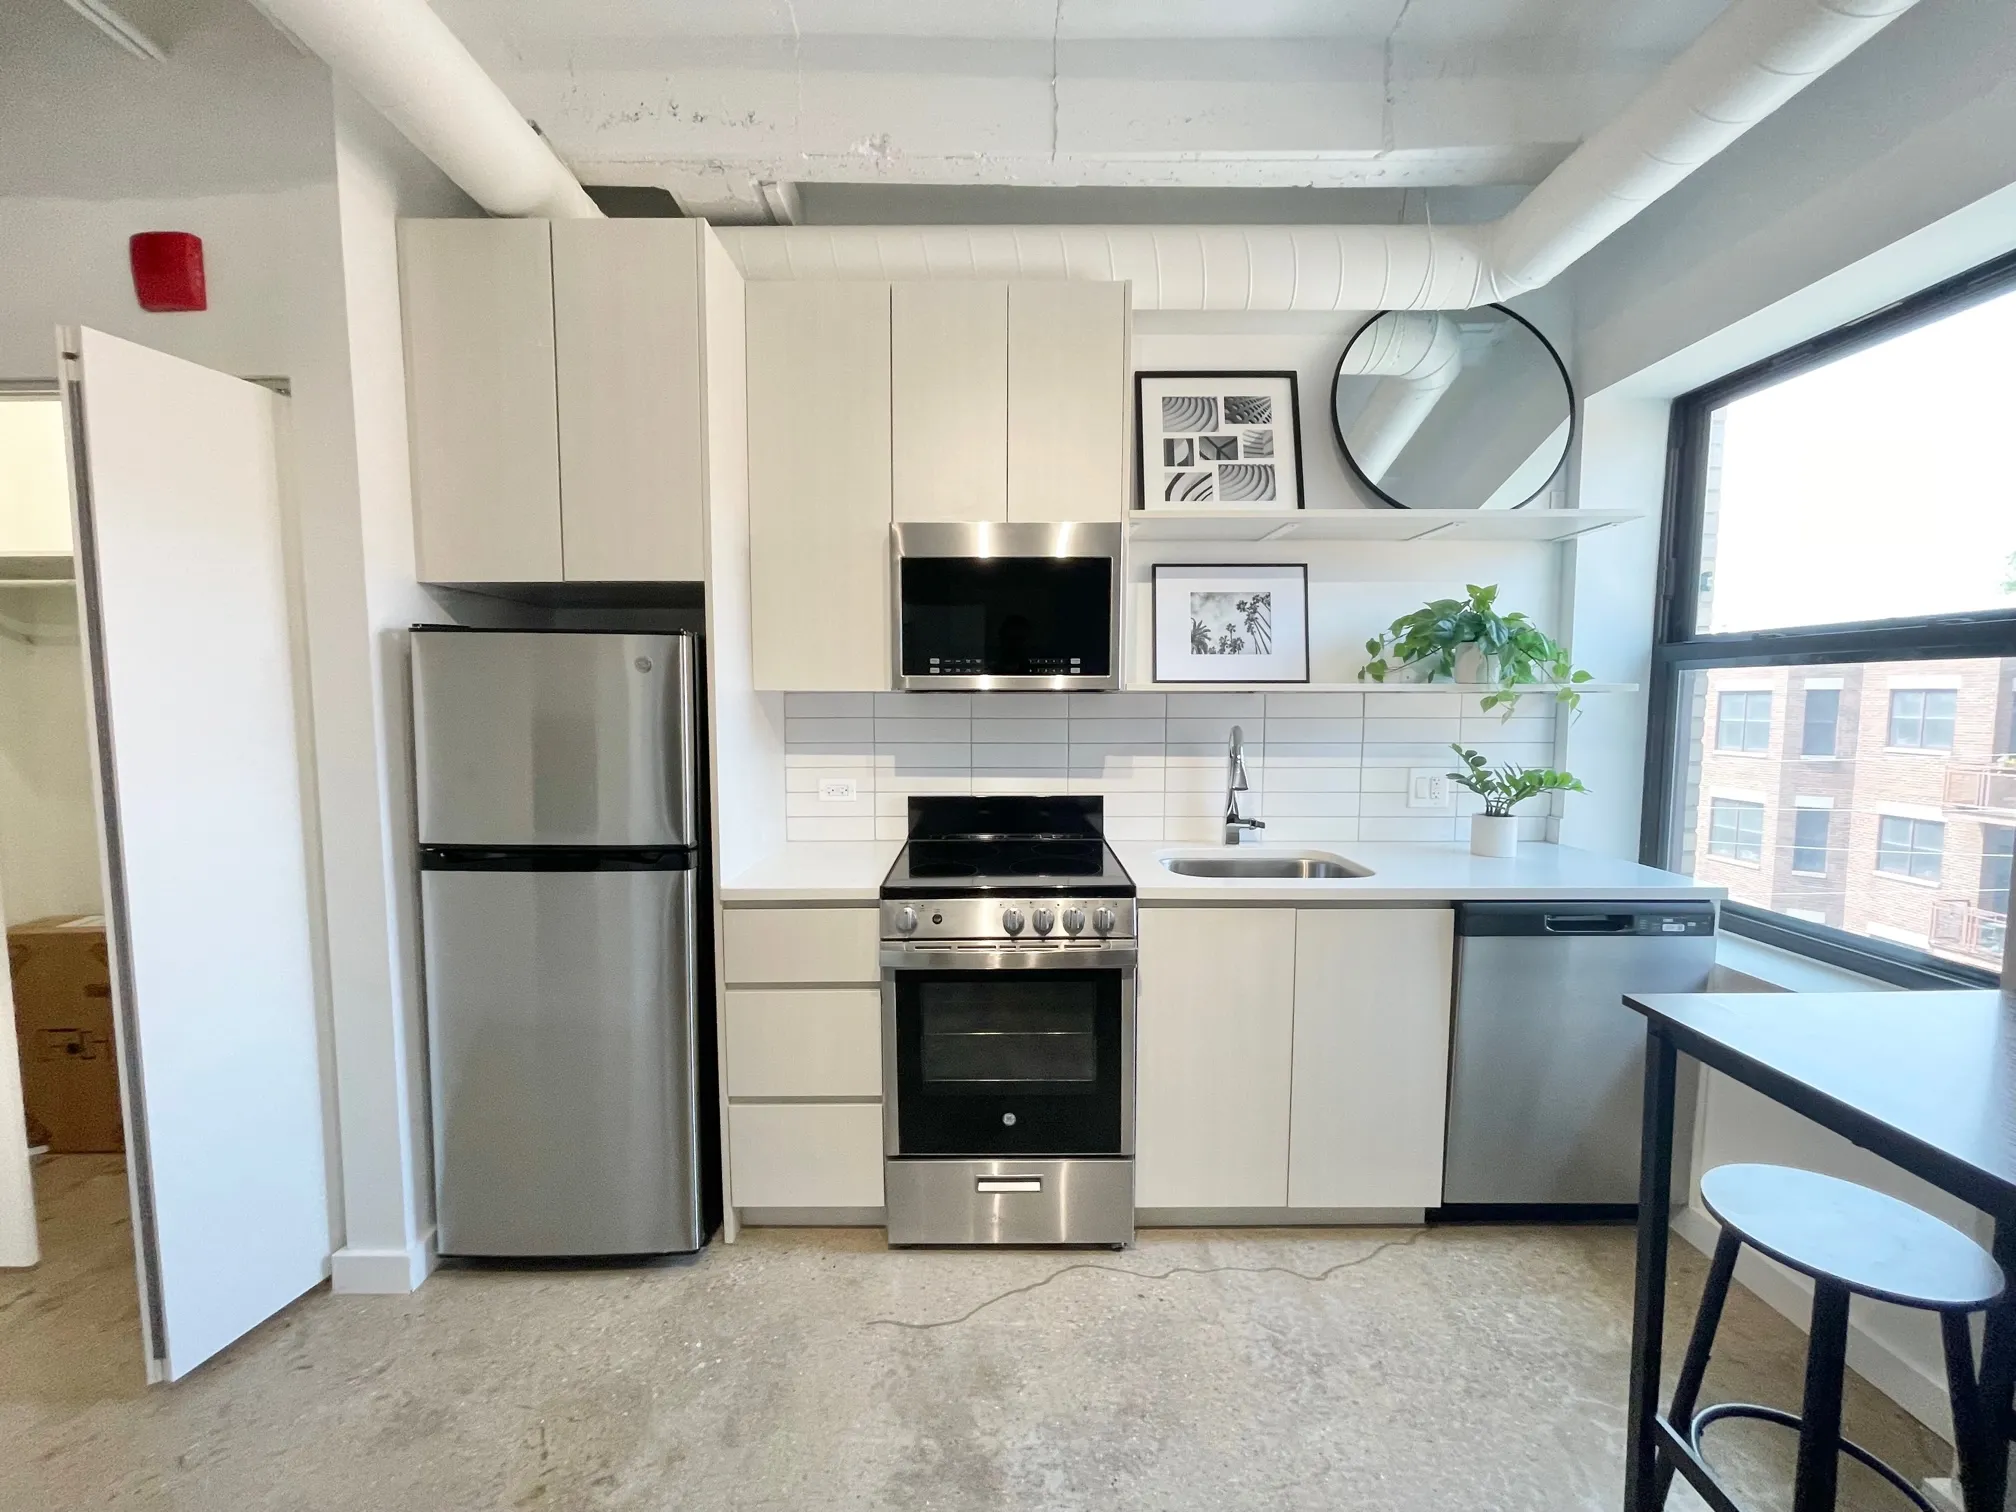 1049 W LAWRENCE AVE 60640-Lawrence Lofts-Chicago-IL